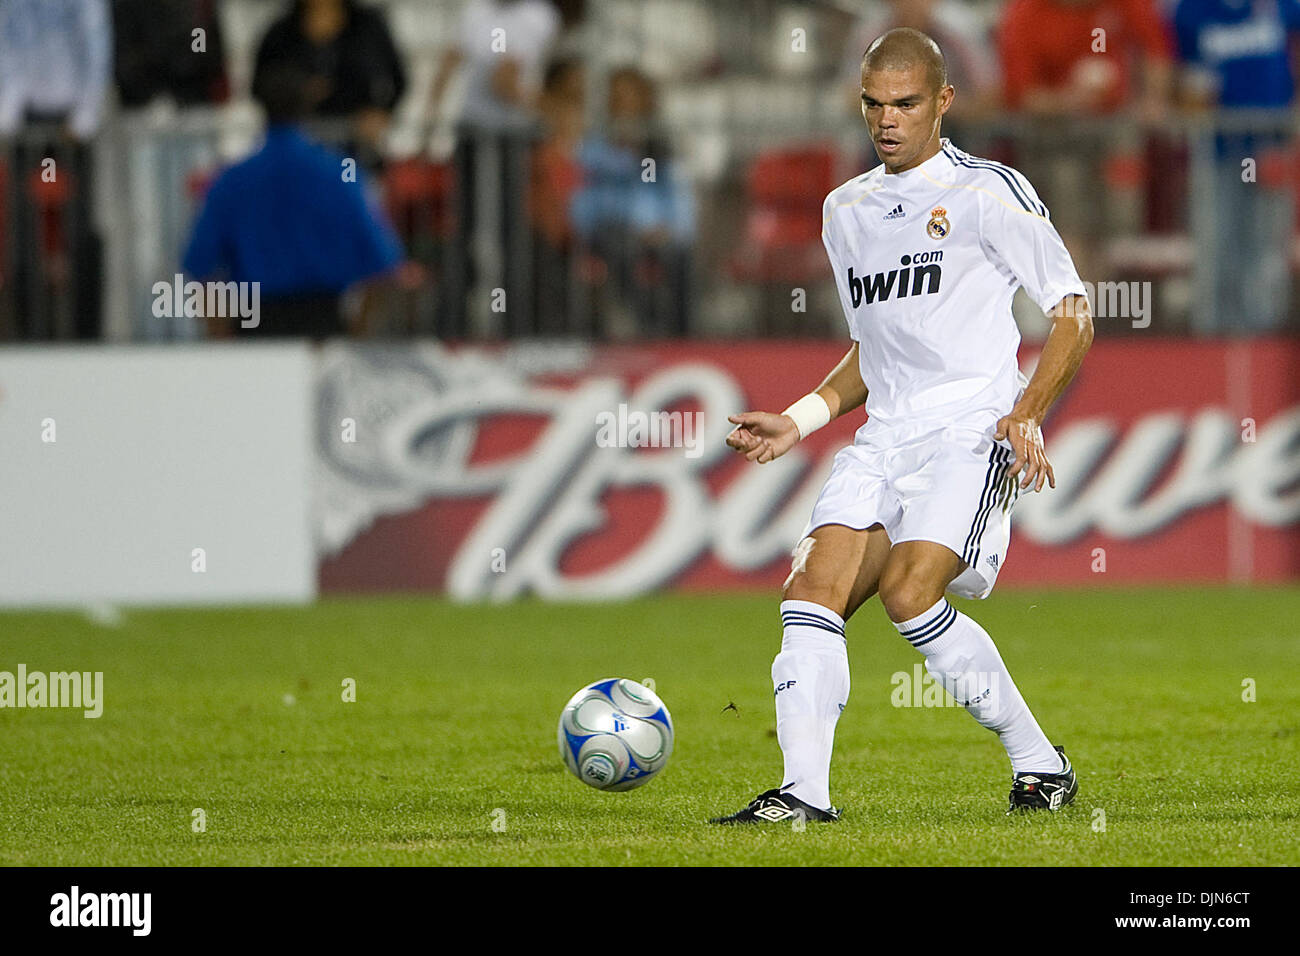 Real Madrid defender Kepler Laveran Lima Ferreira (Pepe) #3 in action during a FIFA international friendly soccer match between Real Madrid and Toronto FC at BMO Field in Toronto..Real Madrid won 5-1. (Credit Image: © Nick Turchiaro/Southcreek Global/ZUMApress.com) Stock Photo